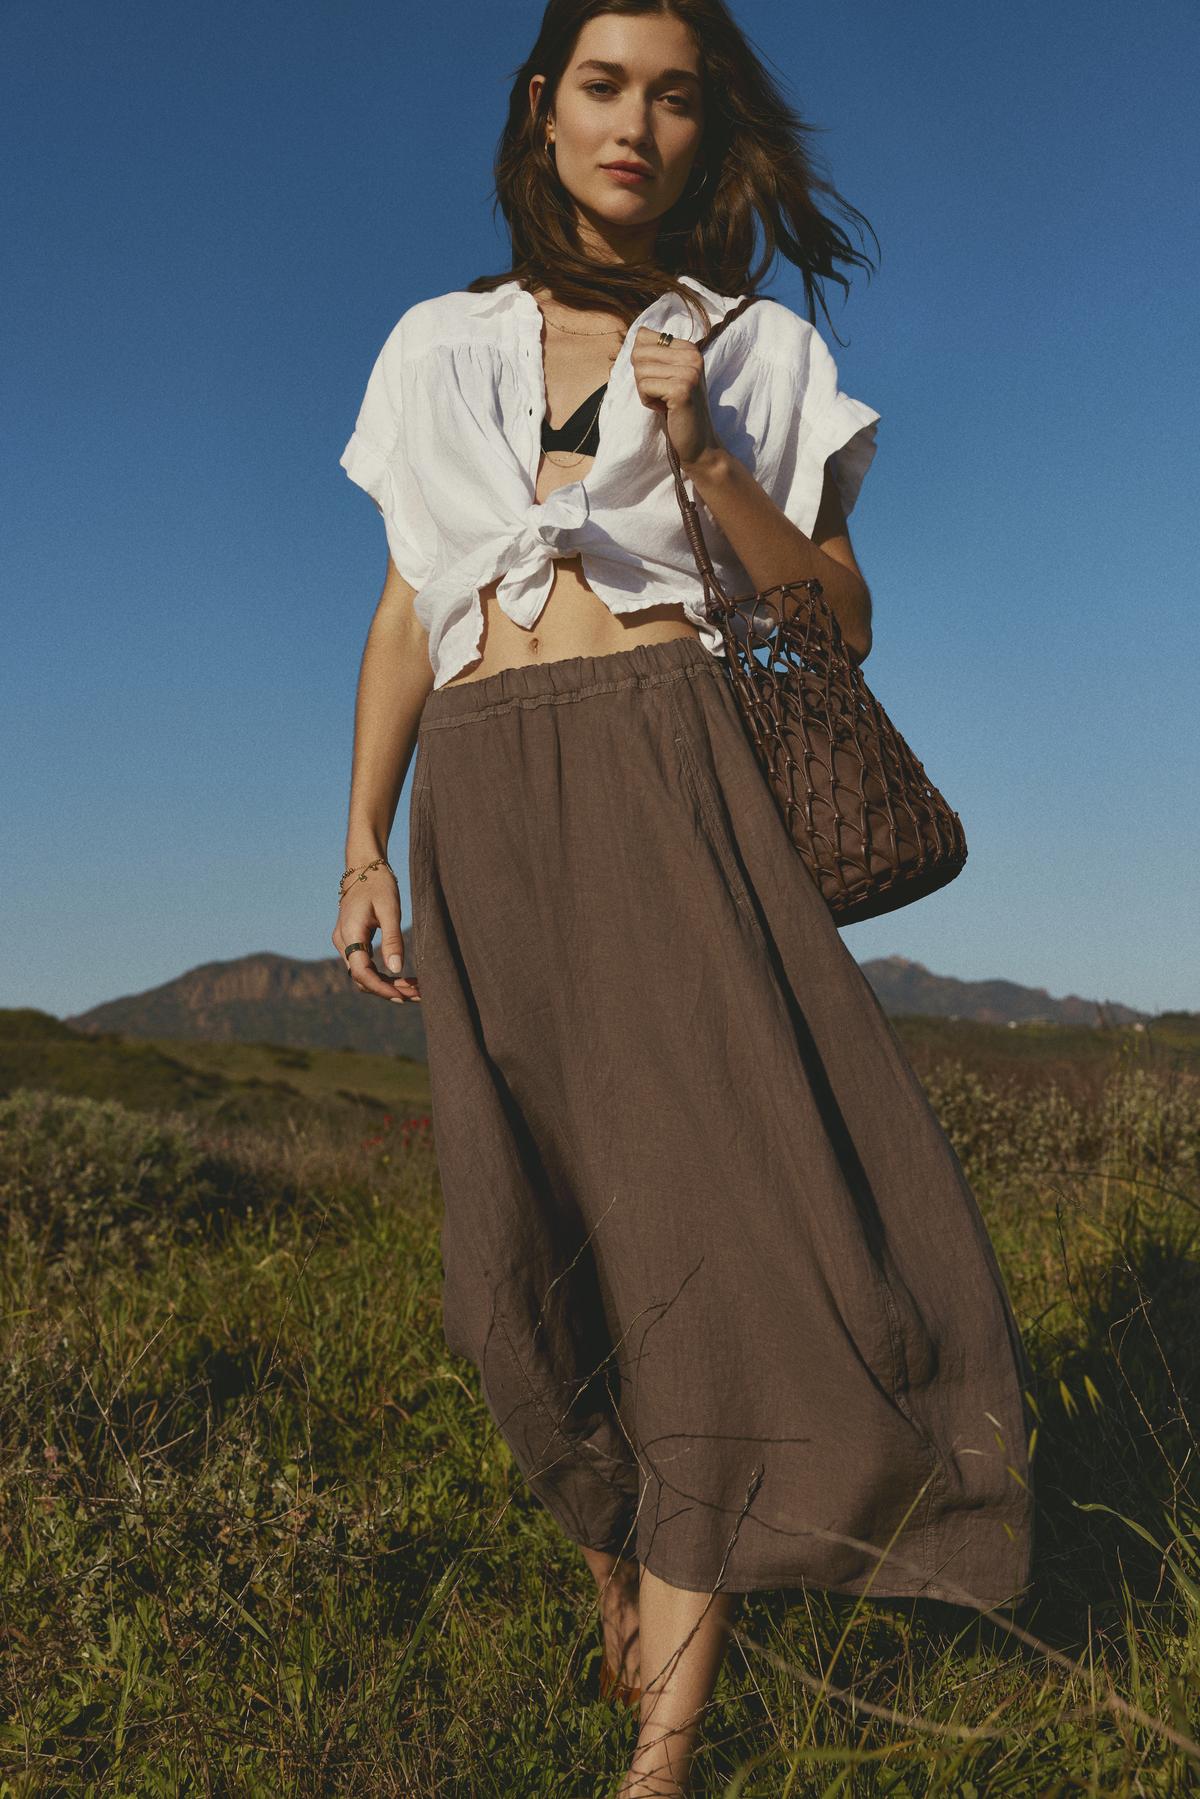 Woman walking in a field wearing a cropped ARIA LINEN BUTTON FRONT TOP from Velvet by Graham & Spencer, long brown skirt, and carrying a netted bag.-36443419738305